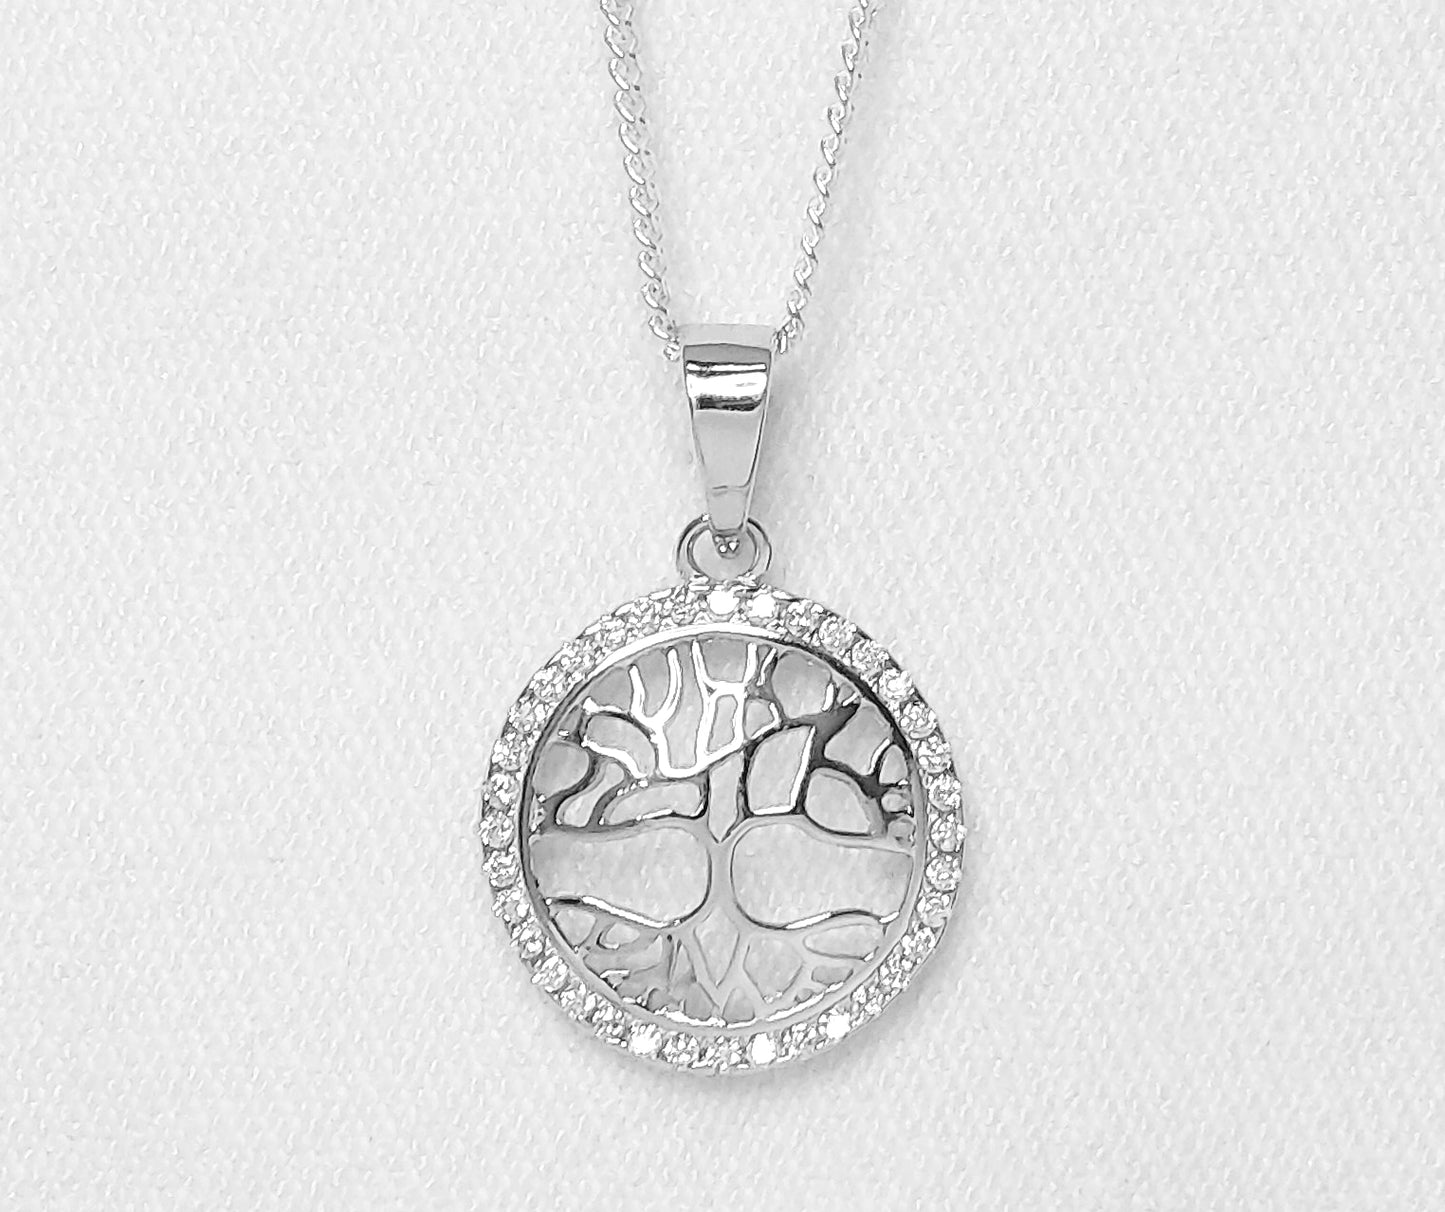 Sterling Silver Tree of Life Pendant with Cubic Zirconia Stones